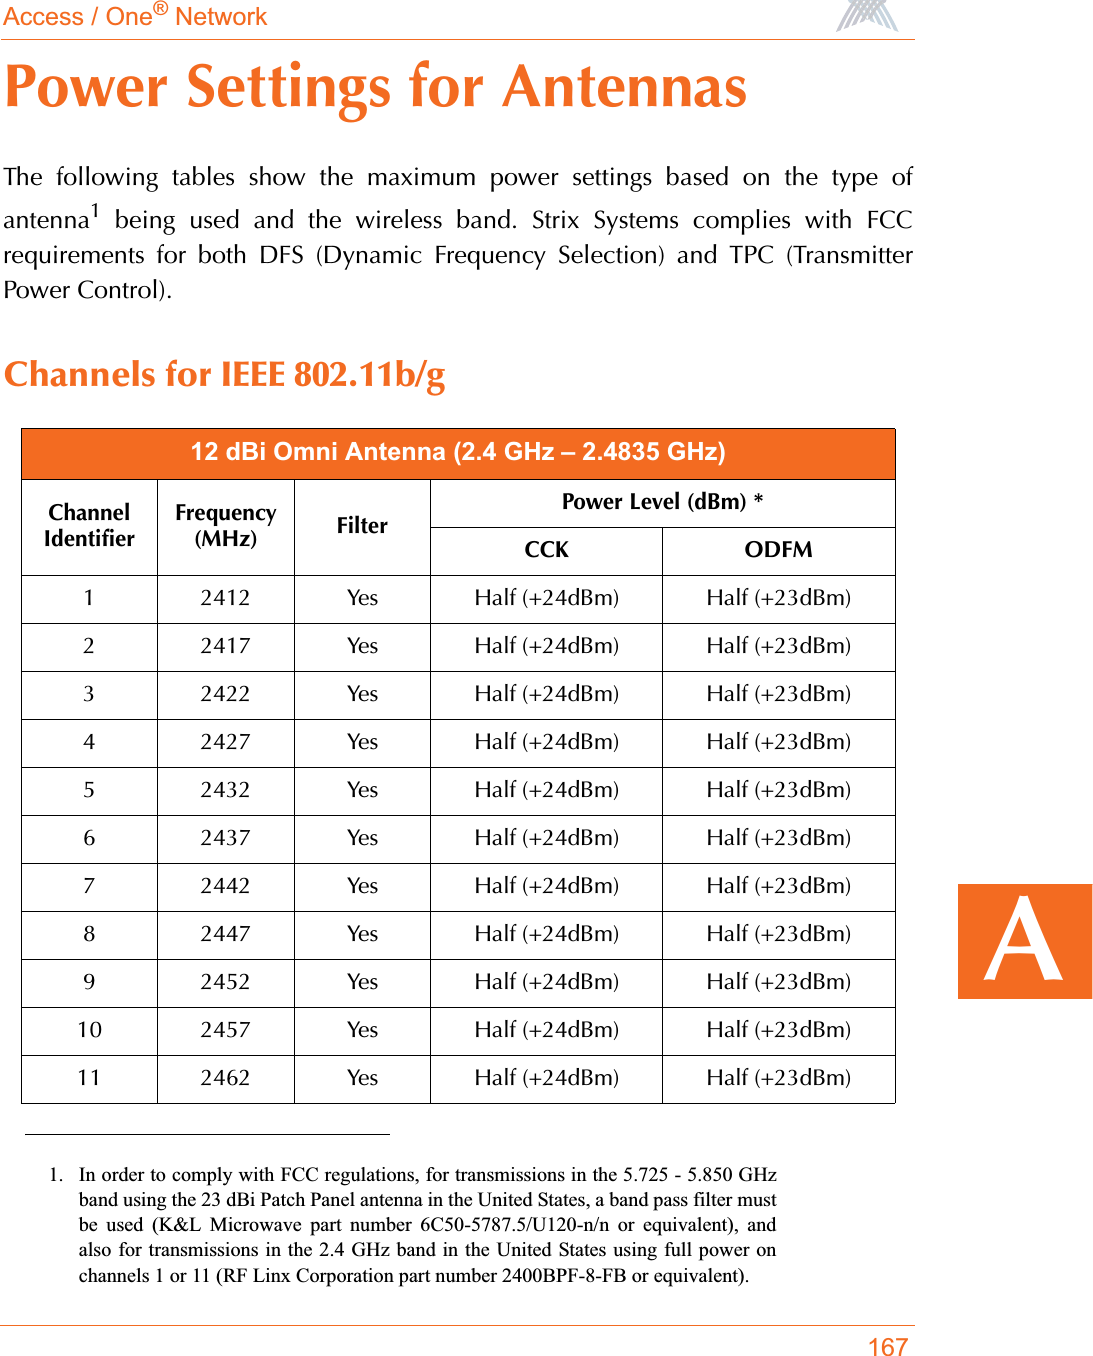 Access / One® Network167APower Settings for AntennasThe following tables show the maximum power settings based on the type ofantenna1 being used and the wireless band. Strix Systems complies with FCCrequirements for both DFS (Dynamic Frequency Selection) and TPC (TransmitterPower Control).Channels for IEEE 802.11b/g1. In order to comply with FCC regulations, for transmissions in the 5.725 - 5.850 GHzband using the 23 dBi Patch Panel antenna in the United States, a band pass filter mustbe used (K&amp;L Microwave part number 6C50-5787.5/U120-n/n or equivalent), andalso for transmissions in the 2.4 GHz band in the United States using full power onchannels 1 or 11 (RF Linx Corporation part number 2400BPF-8-FB or equivalent).12 dBi Omni Antenna (2.4 GHz – 2.4835 GHz)ChannelIdentifierFrequency (MHz) FilterPower Level (dBm) *CCK ODFM1 2412 Yes Half (+24dBm) Half (+23dBm)2 2417 Yes Half (+24dBm) Half (+23dBm)3 2422 Yes Half (+24dBm) Half (+23dBm)4 2427 Yes Half (+24dBm) Half (+23dBm)5 2432 Yes Half (+24dBm) Half (+23dBm)6 2437 Yes Half (+24dBm) Half (+23dBm)7 2442 Yes Half (+24dBm) Half (+23dBm)8 2447 Yes Half (+24dBm) Half (+23dBm)9 2452 Yes Half (+24dBm) Half (+23dBm)10 2457 Yes Half (+24dBm) Half (+23dBm)11 2462 Yes Half (+24dBm) Half (+23dBm)